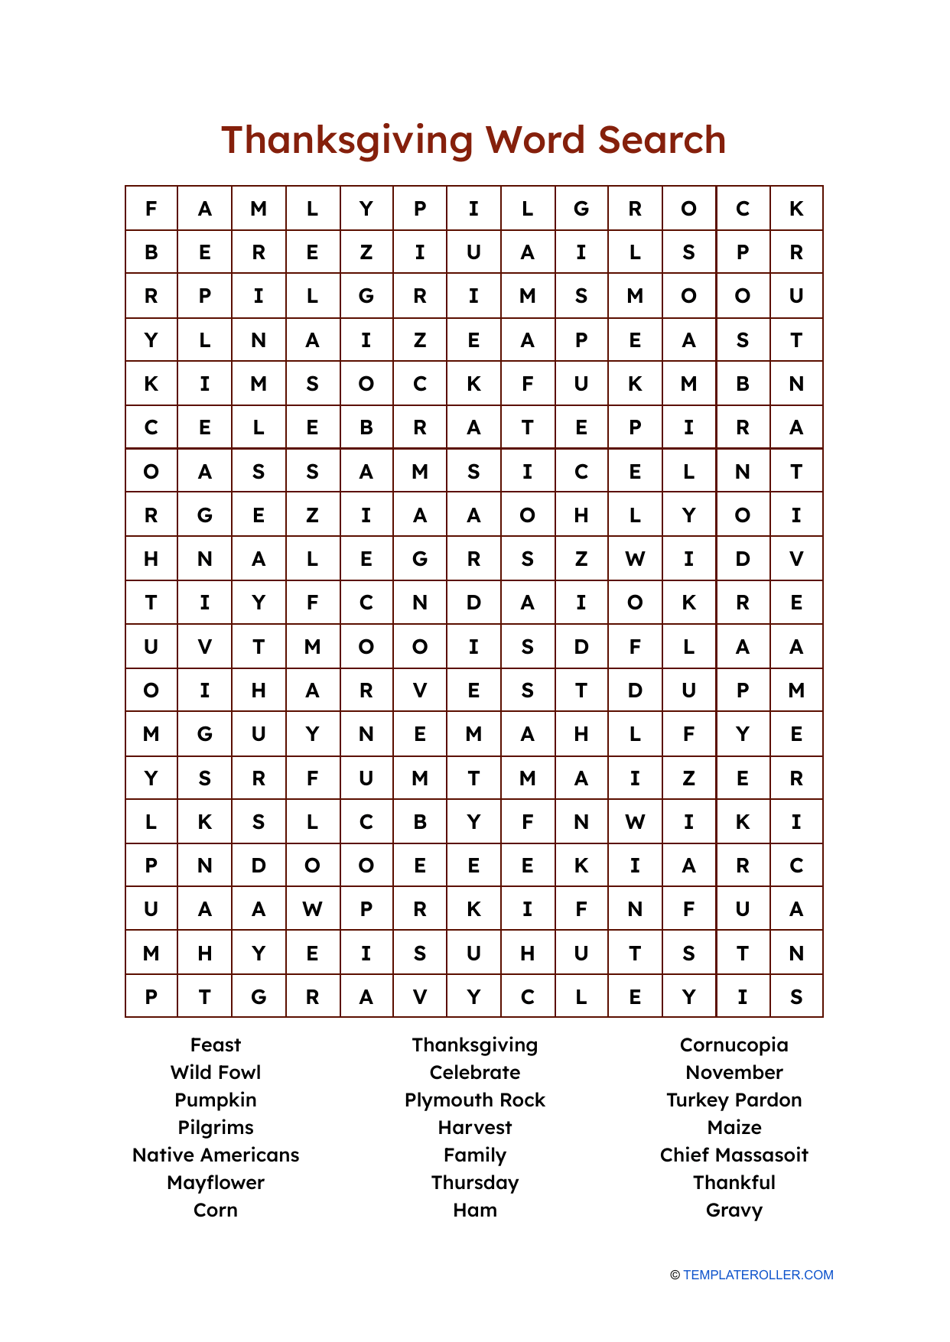 Enjoy Thanksgiving with our festive Word Search activity.